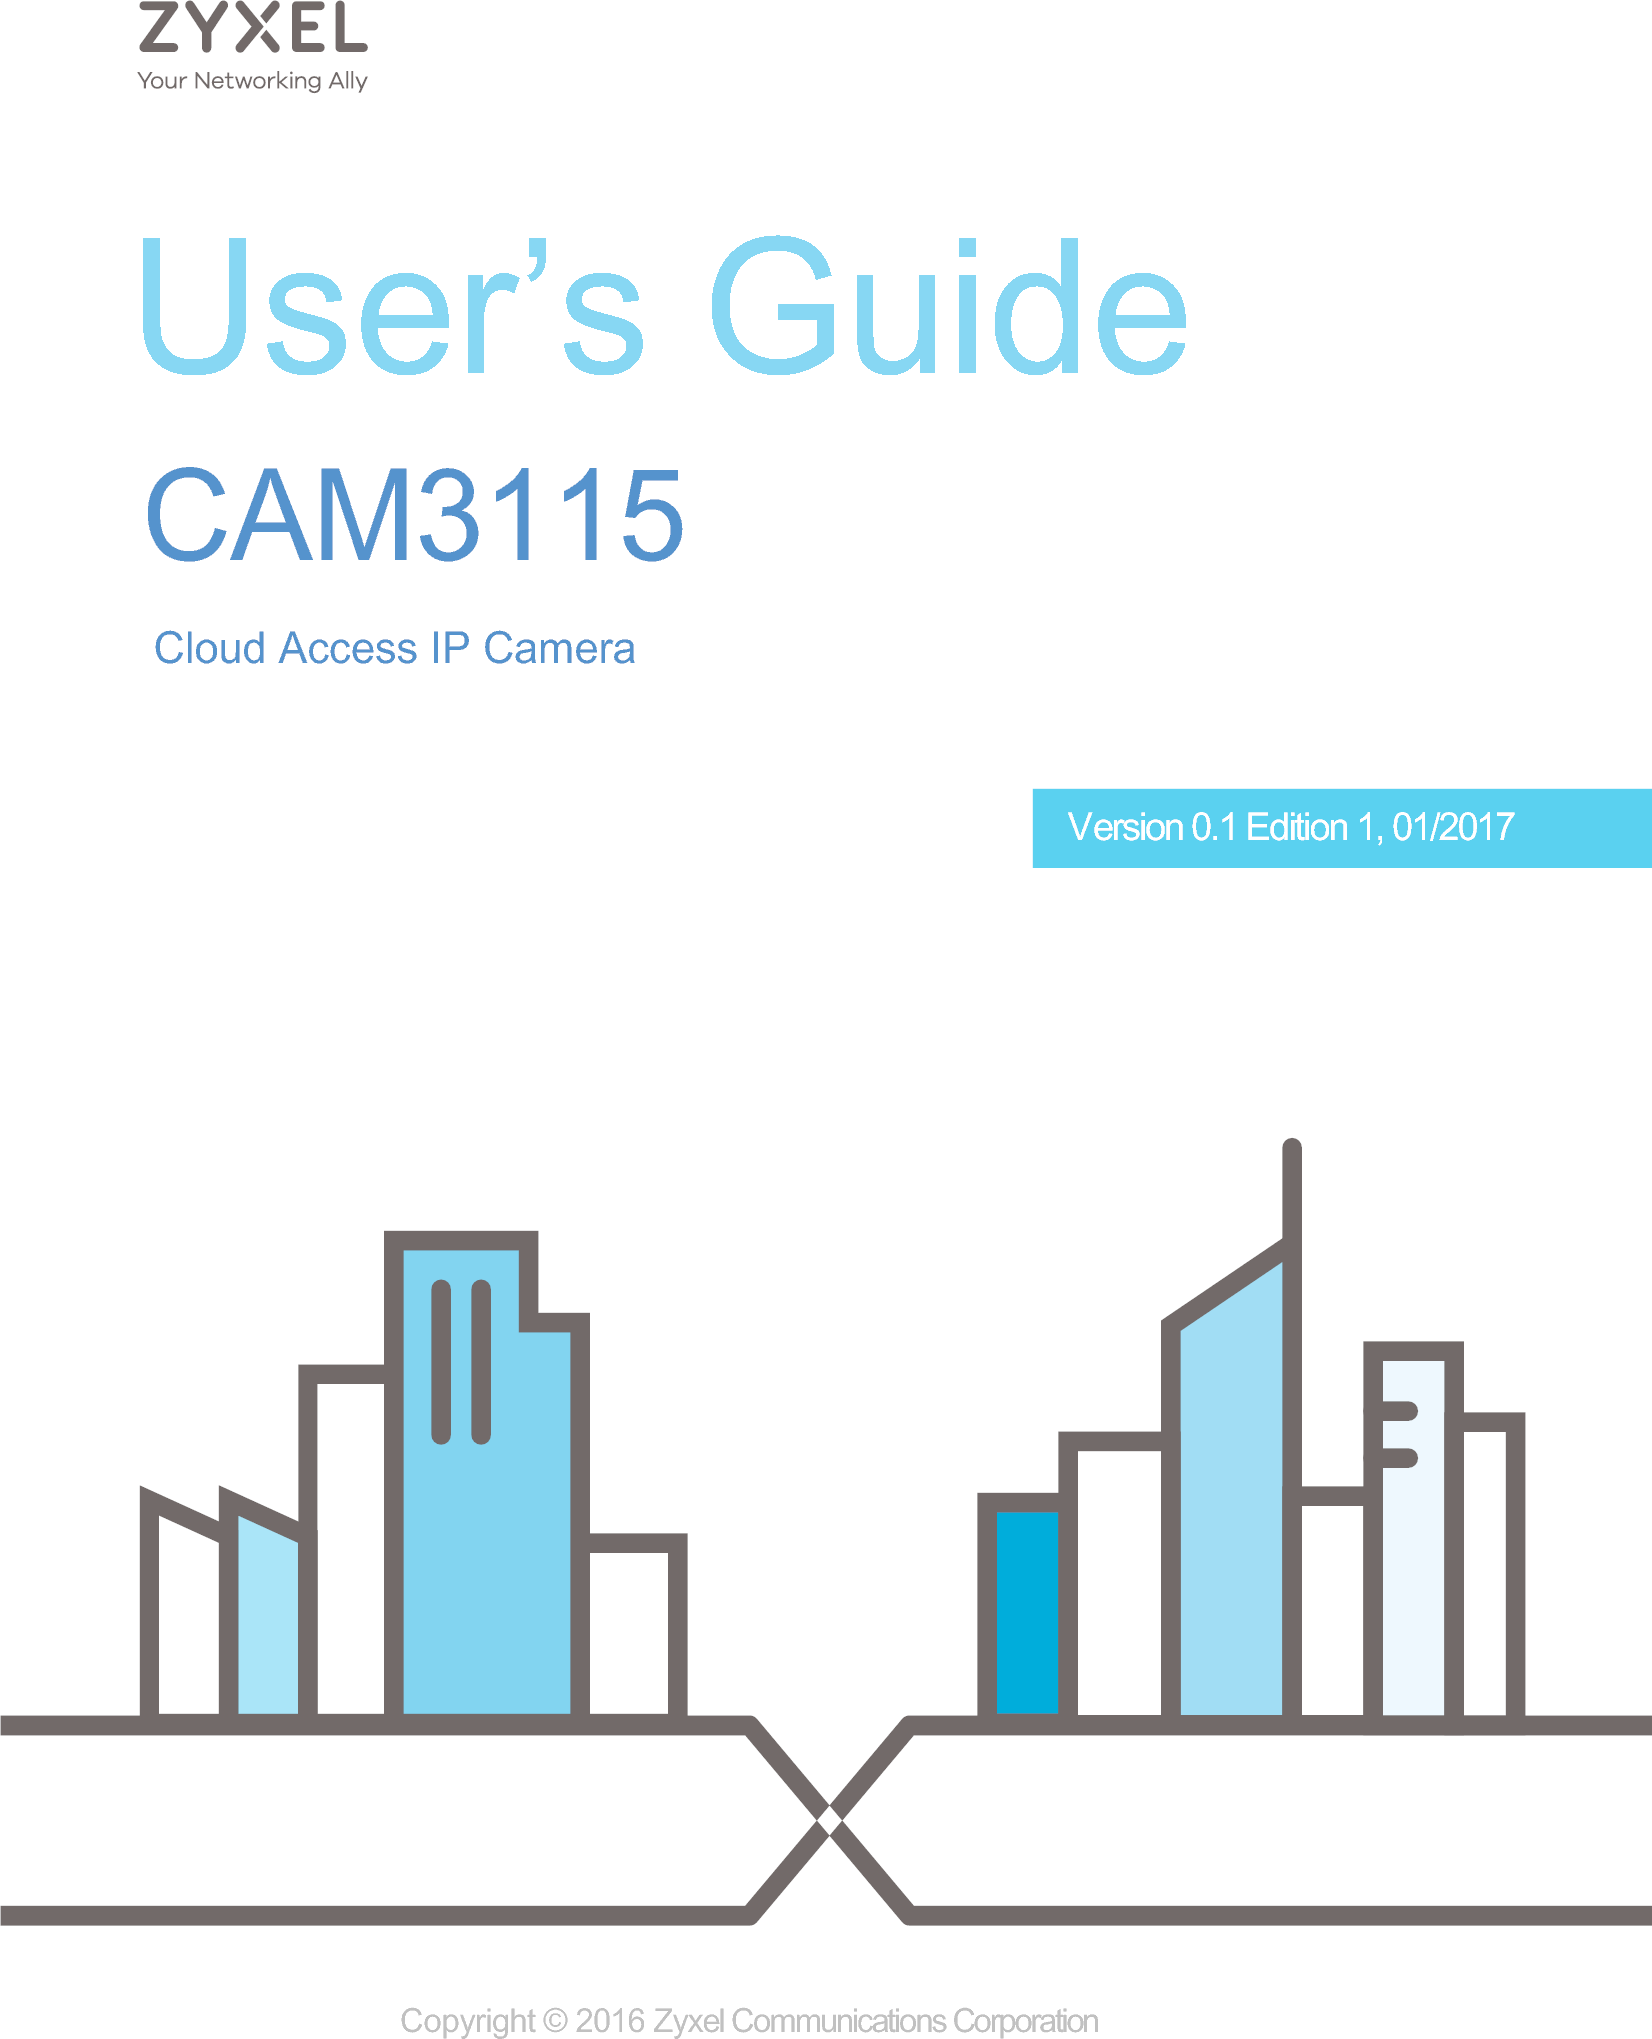  User’s GuideCAM3115Cloud Access IP CameraCopyright © 2016 Zyxel Communications CorporationVersion 0.1 Edition 1, 01/2017